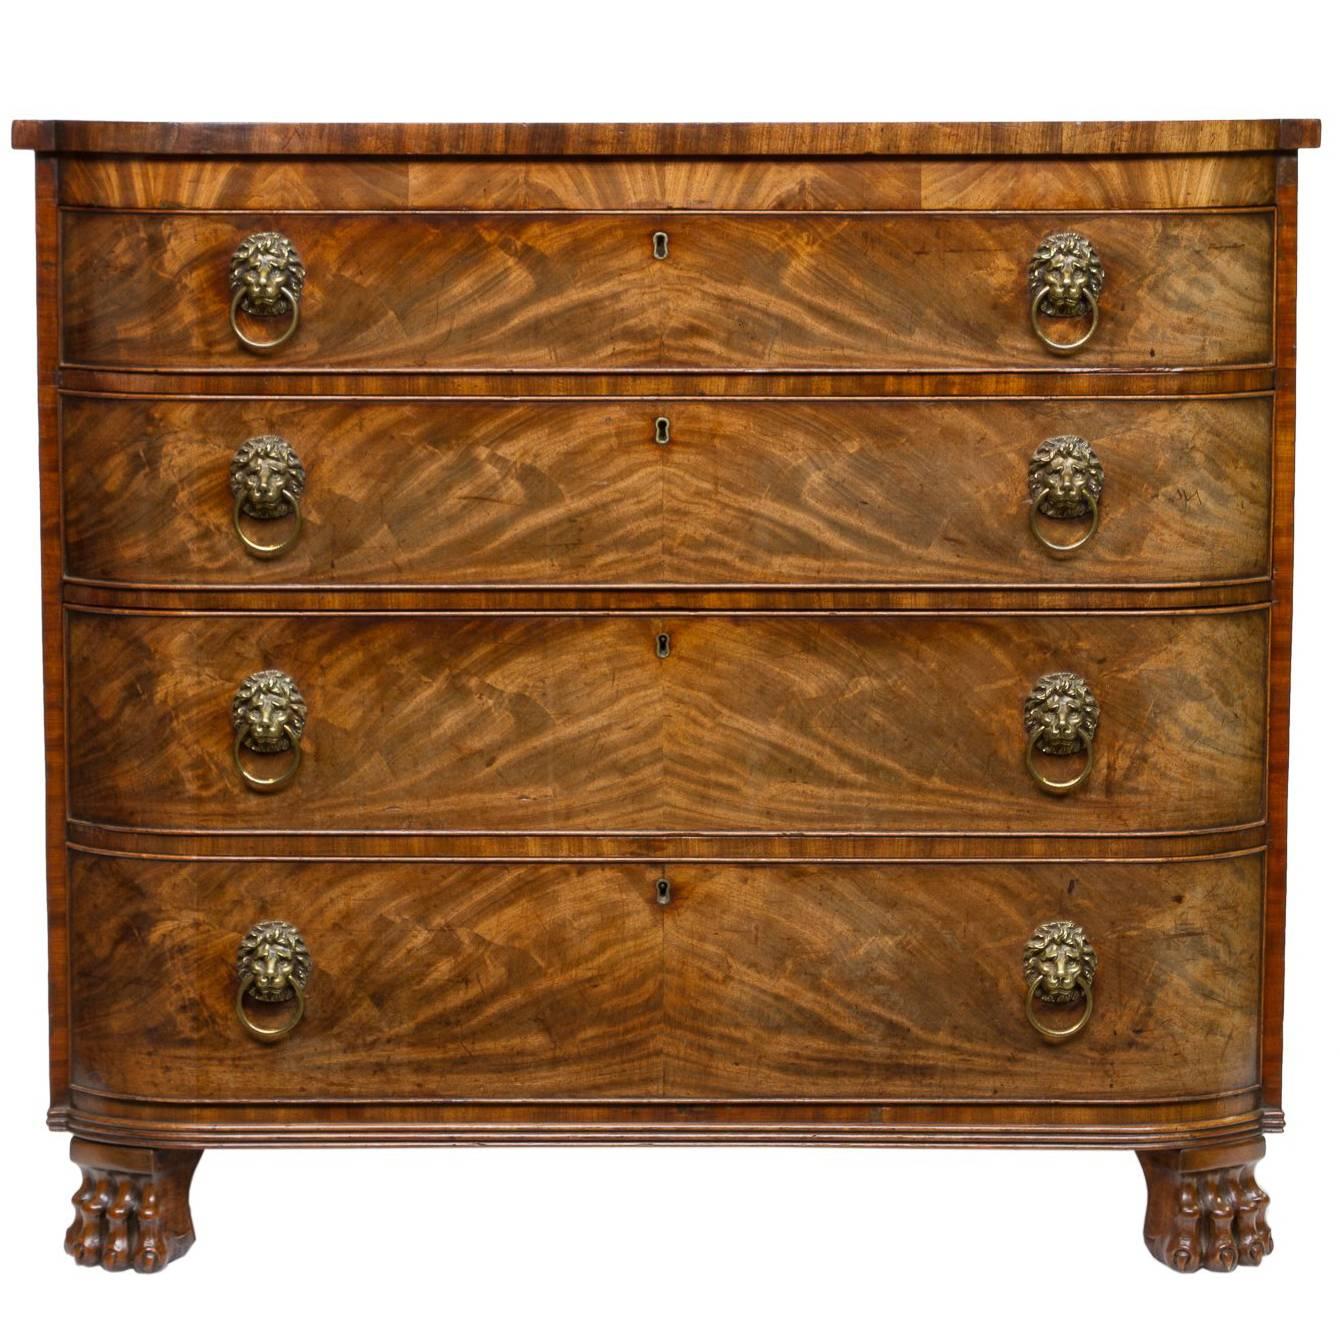 Early 19th Century Scottish Chest of Drawers